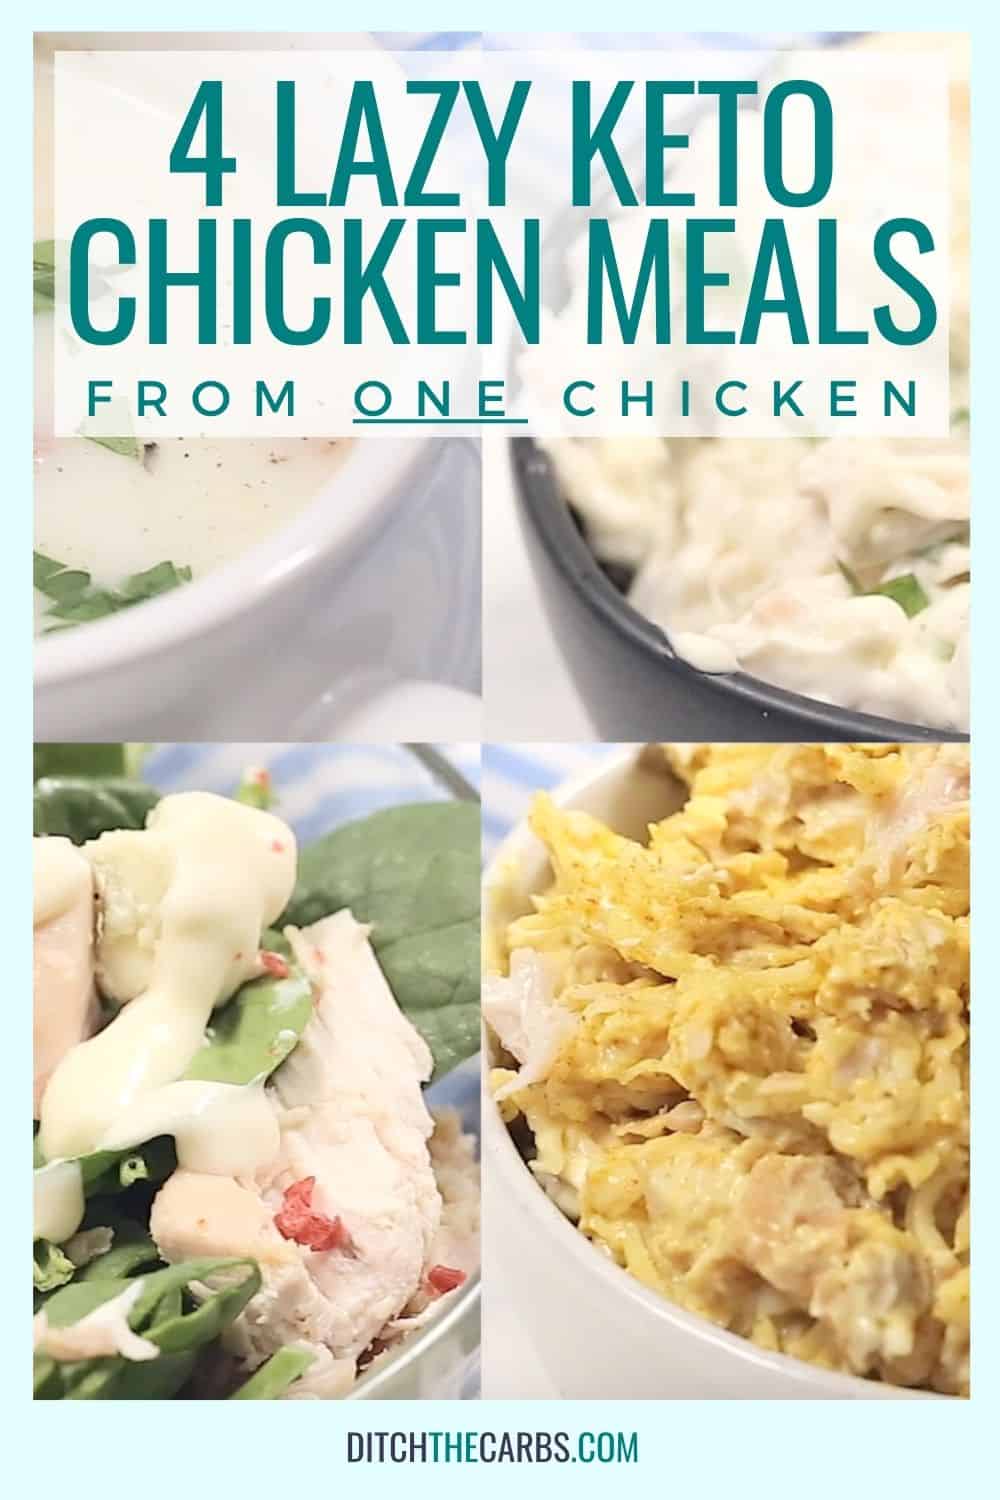 4 lazy keto chicken meals served in four different bowls